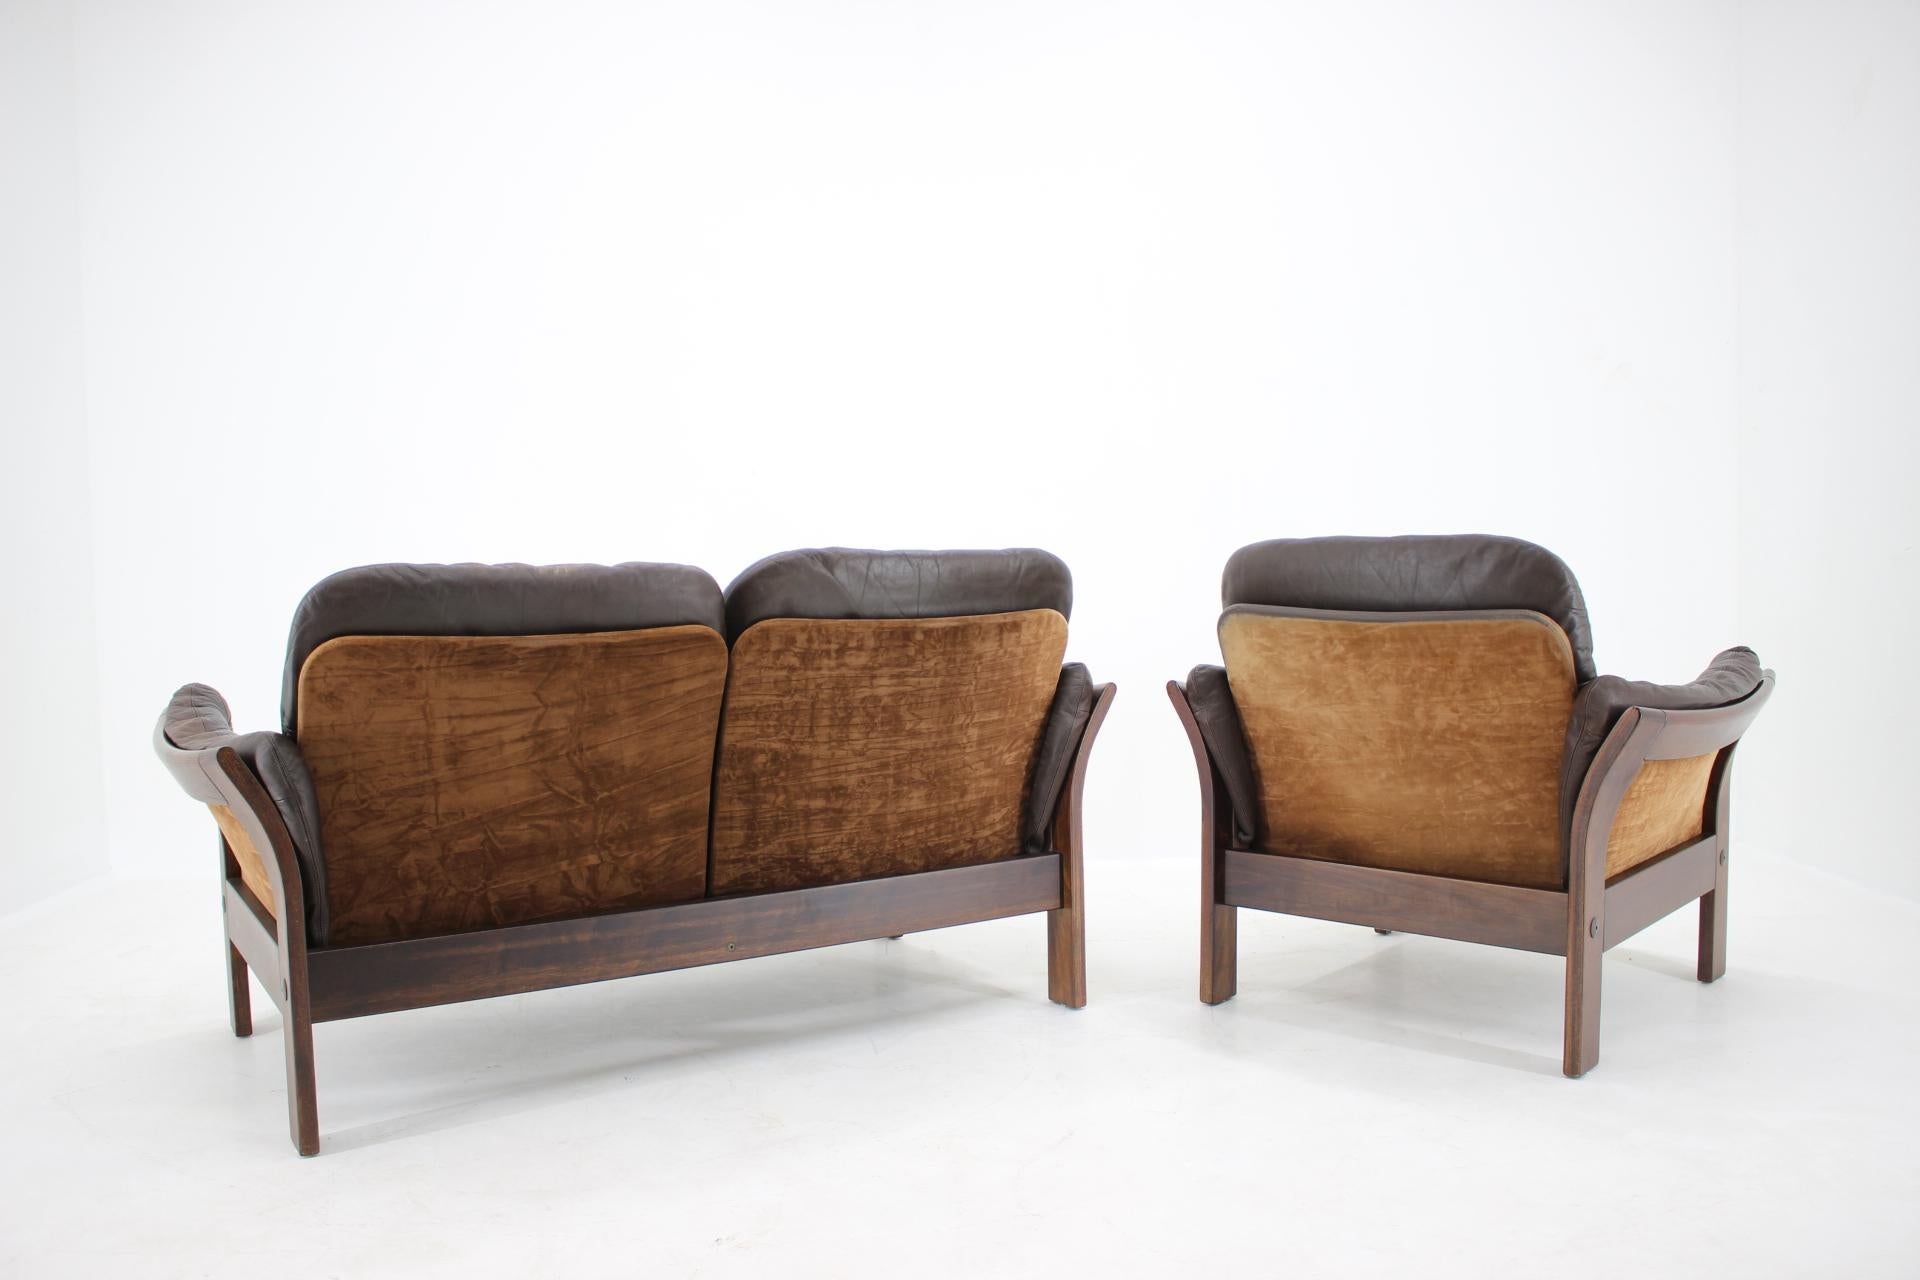 Wood 1970s Georg Thams 2-Seat Sofa and Armchair in Dark Brown Leather, Denmark